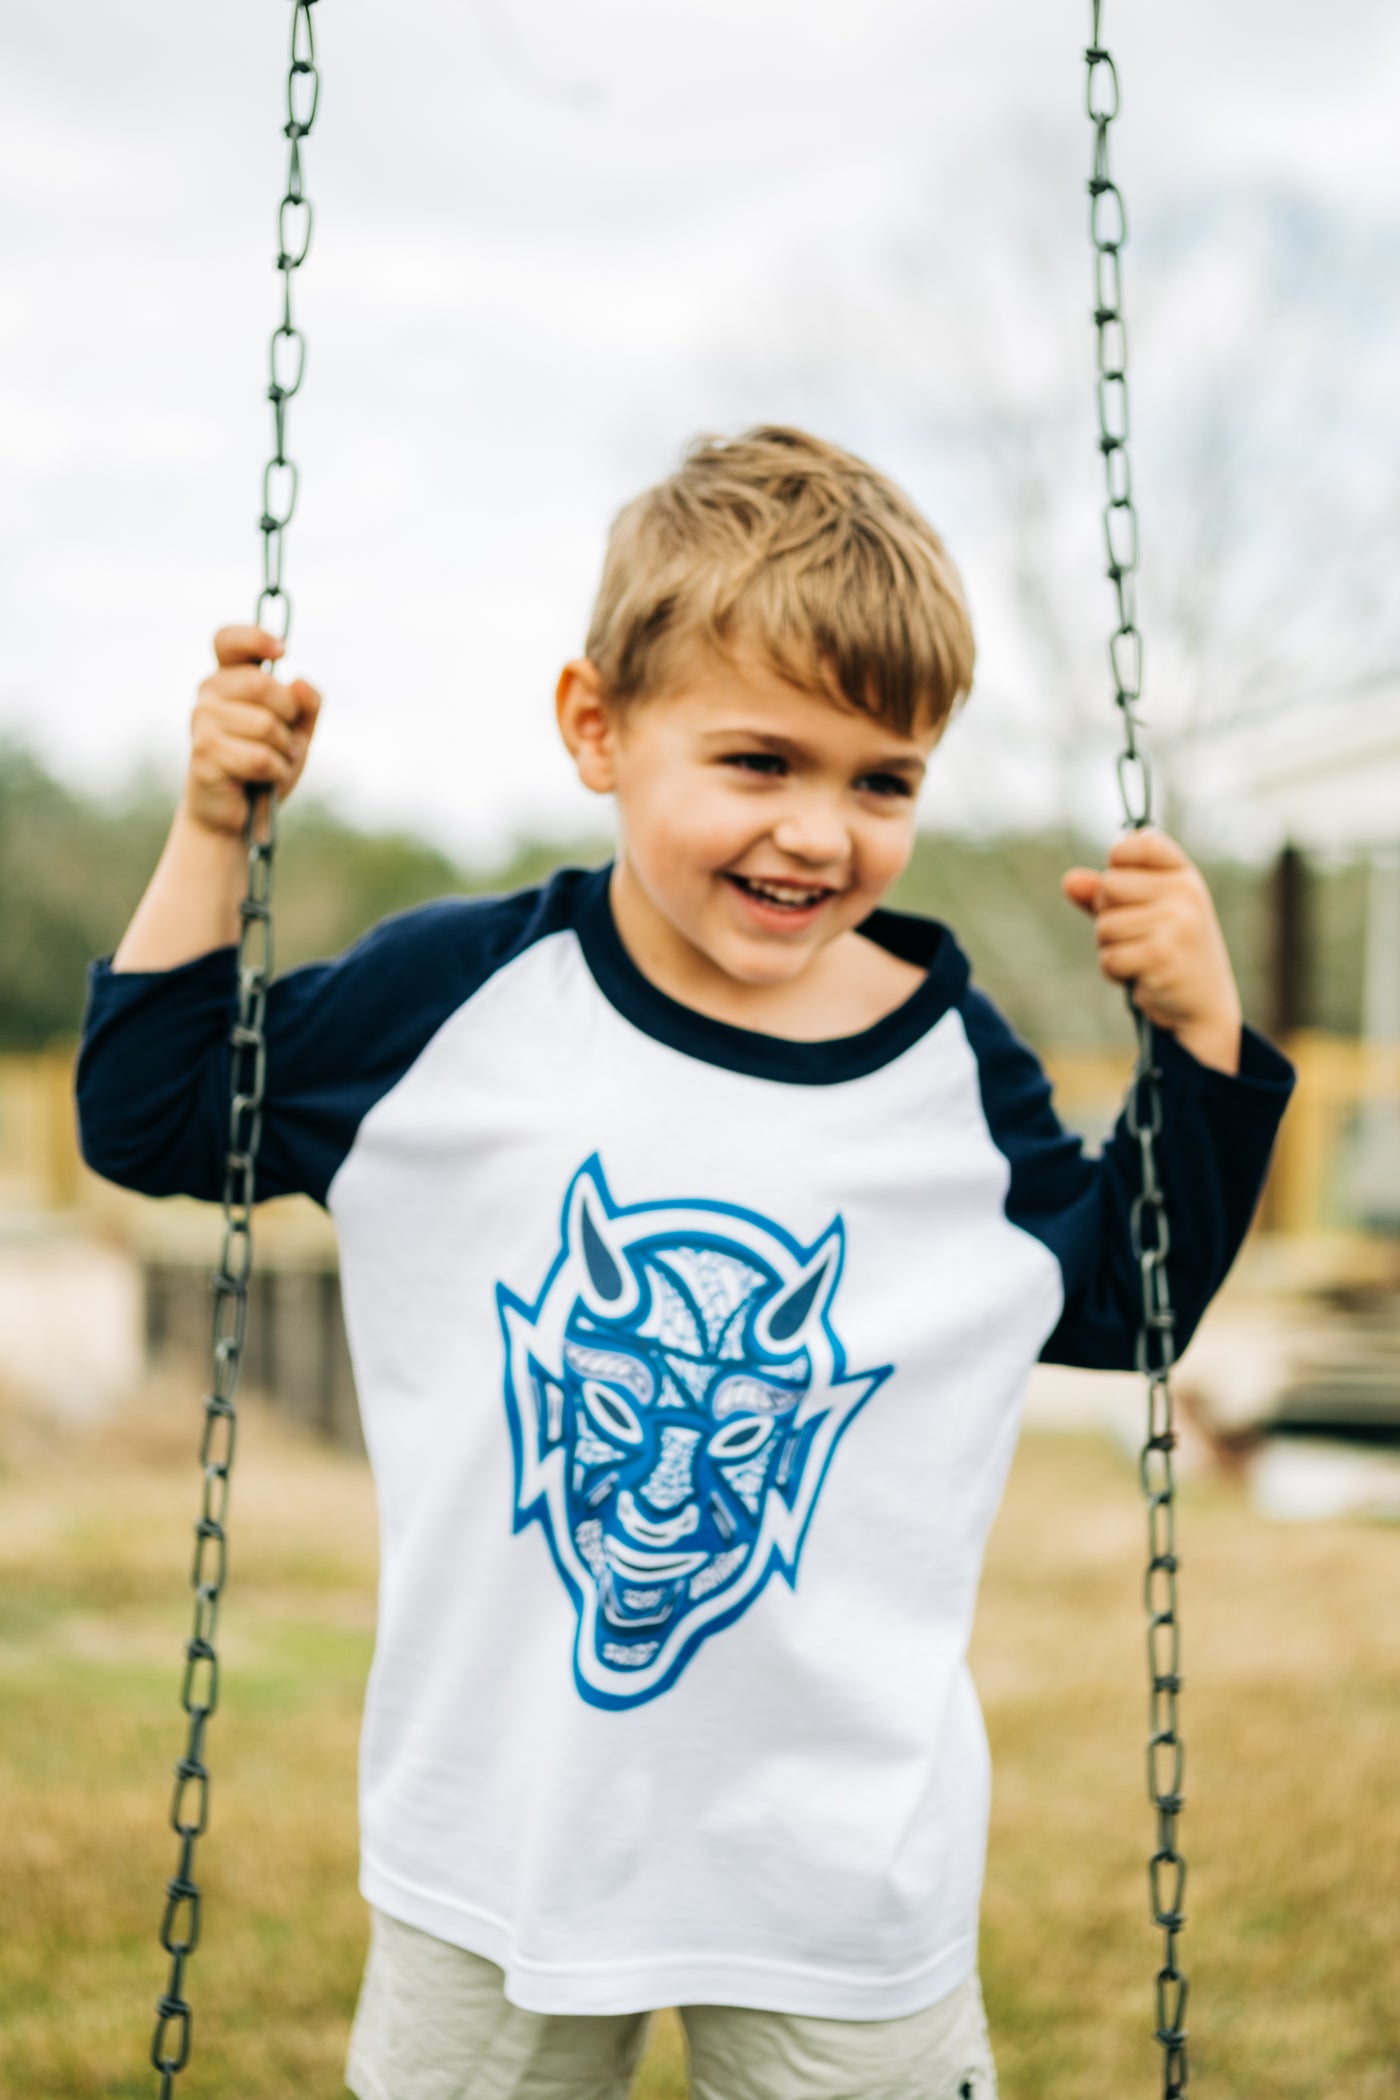 White with navy sleeves raglan tee with a graphic of a devil layered with different designs and different shades of blue